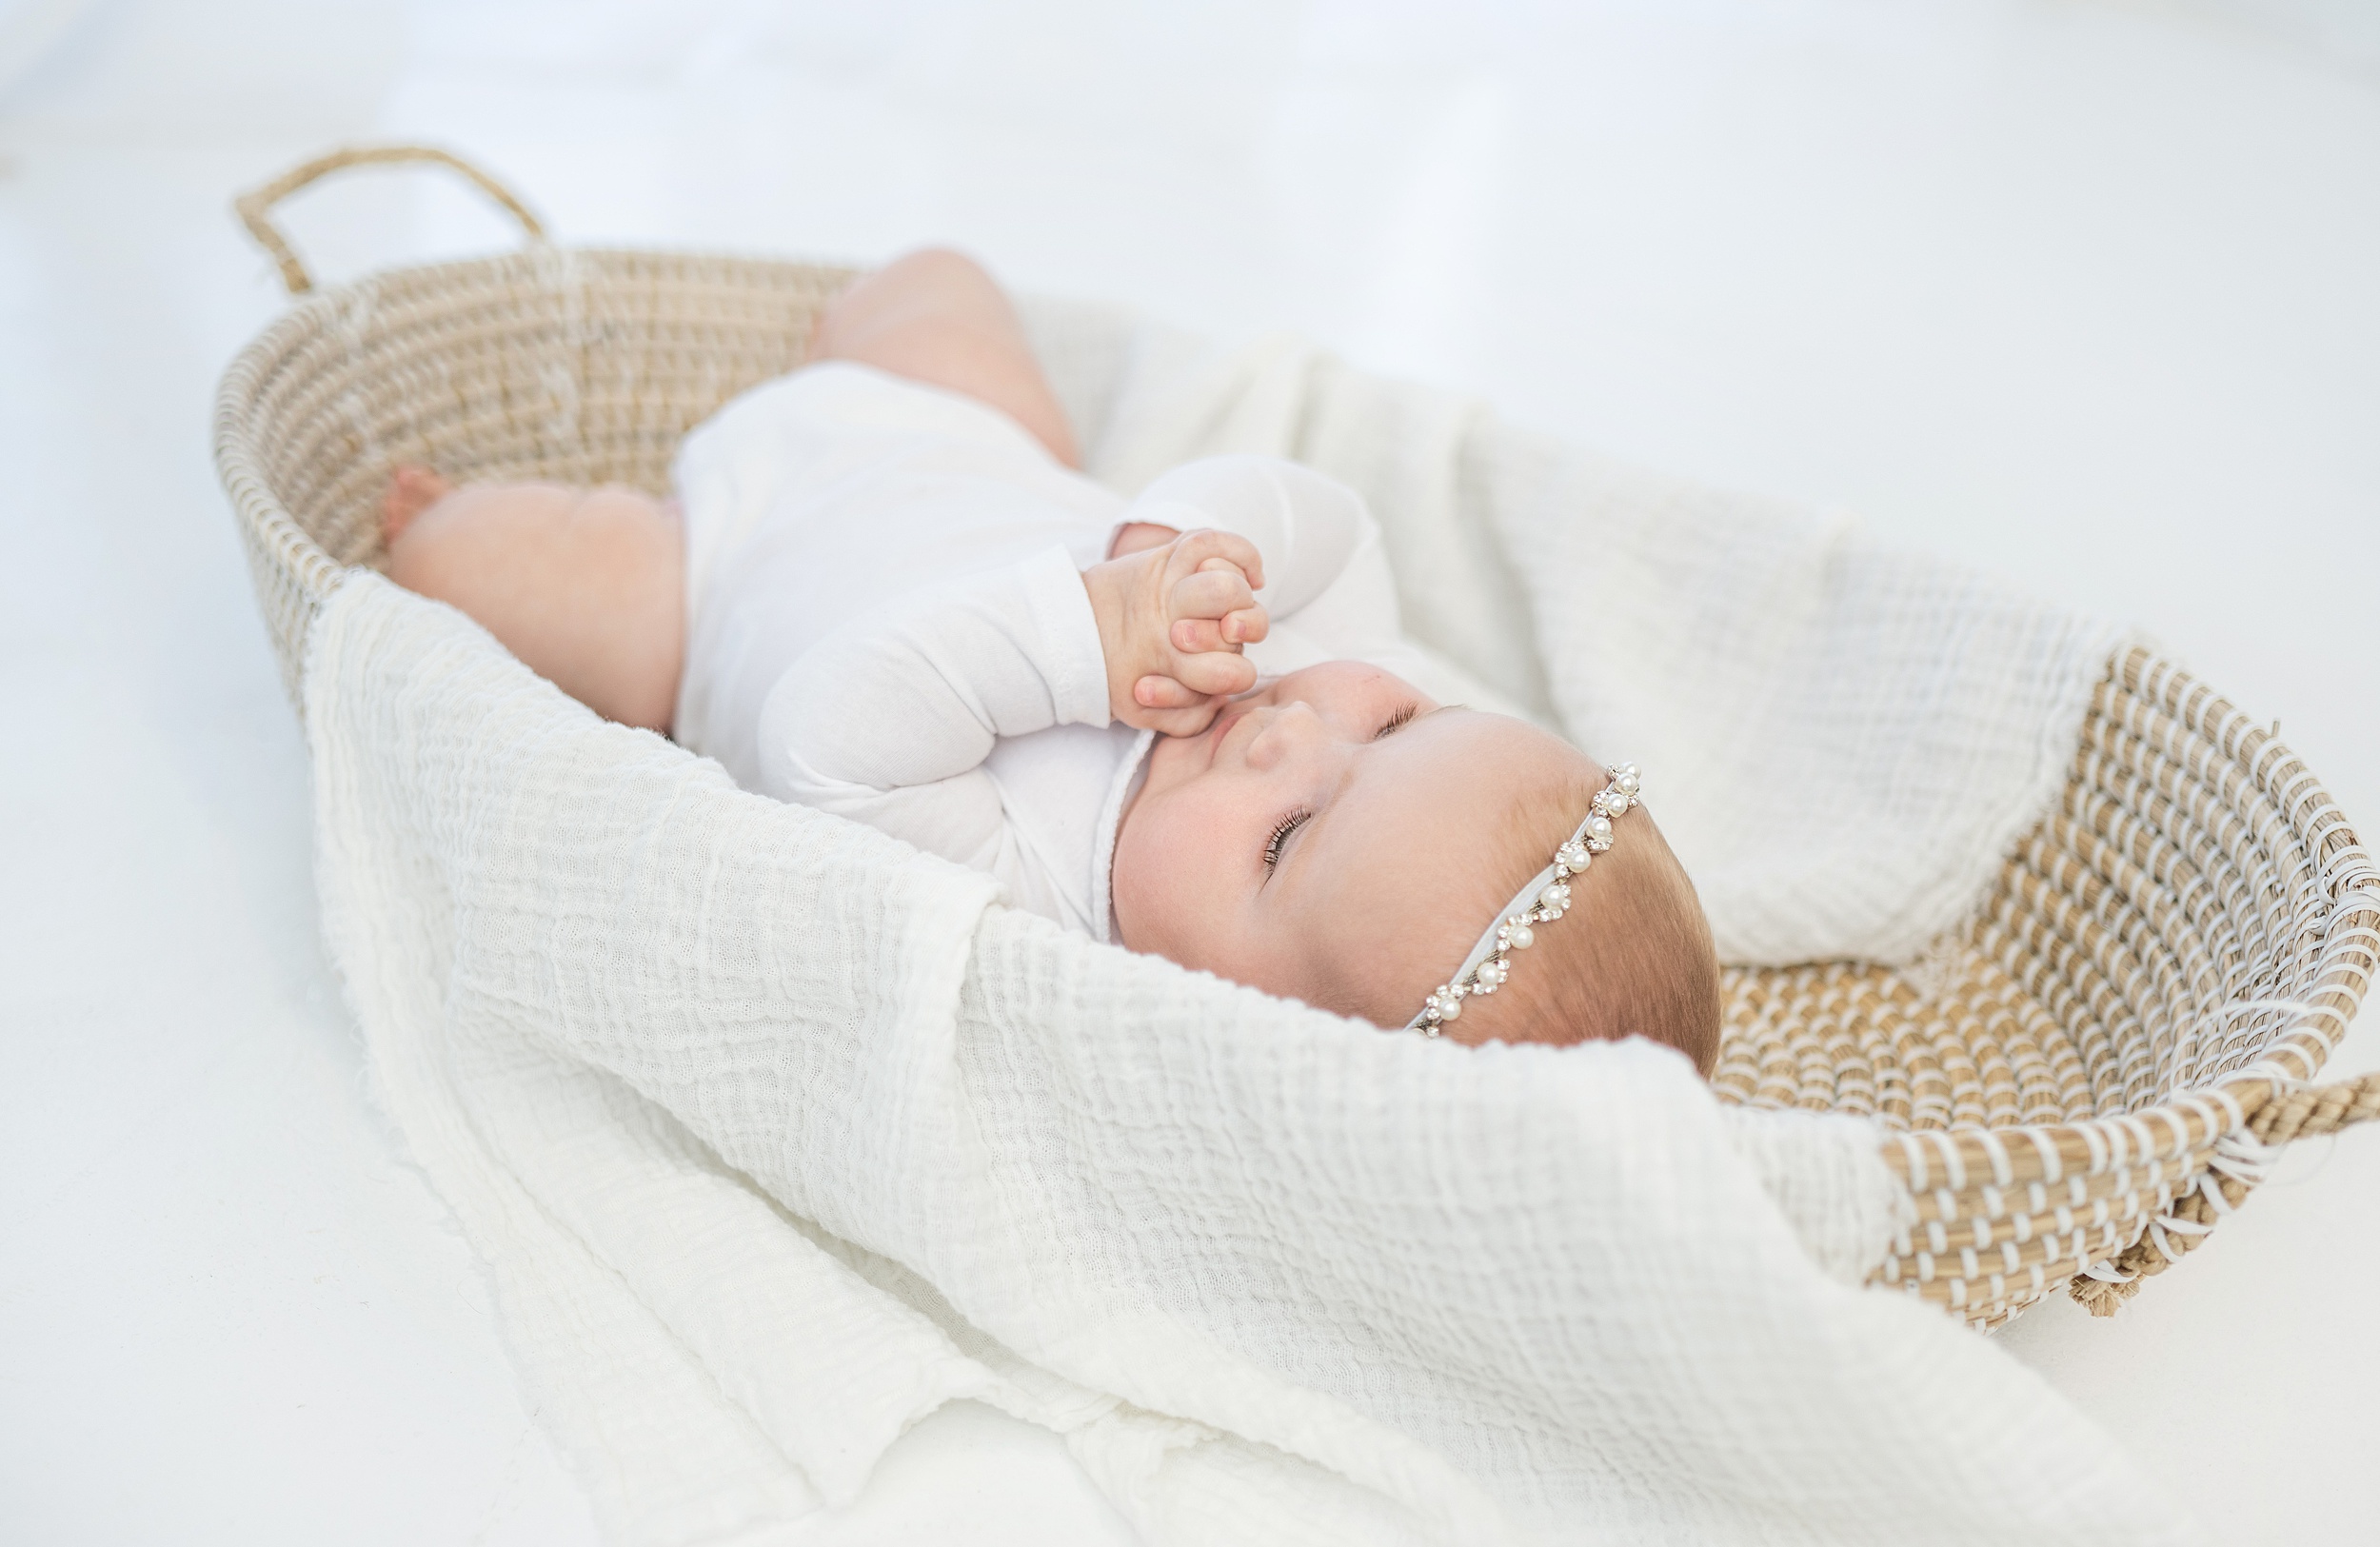 An infant lays in a woven basket wearing a white onesie